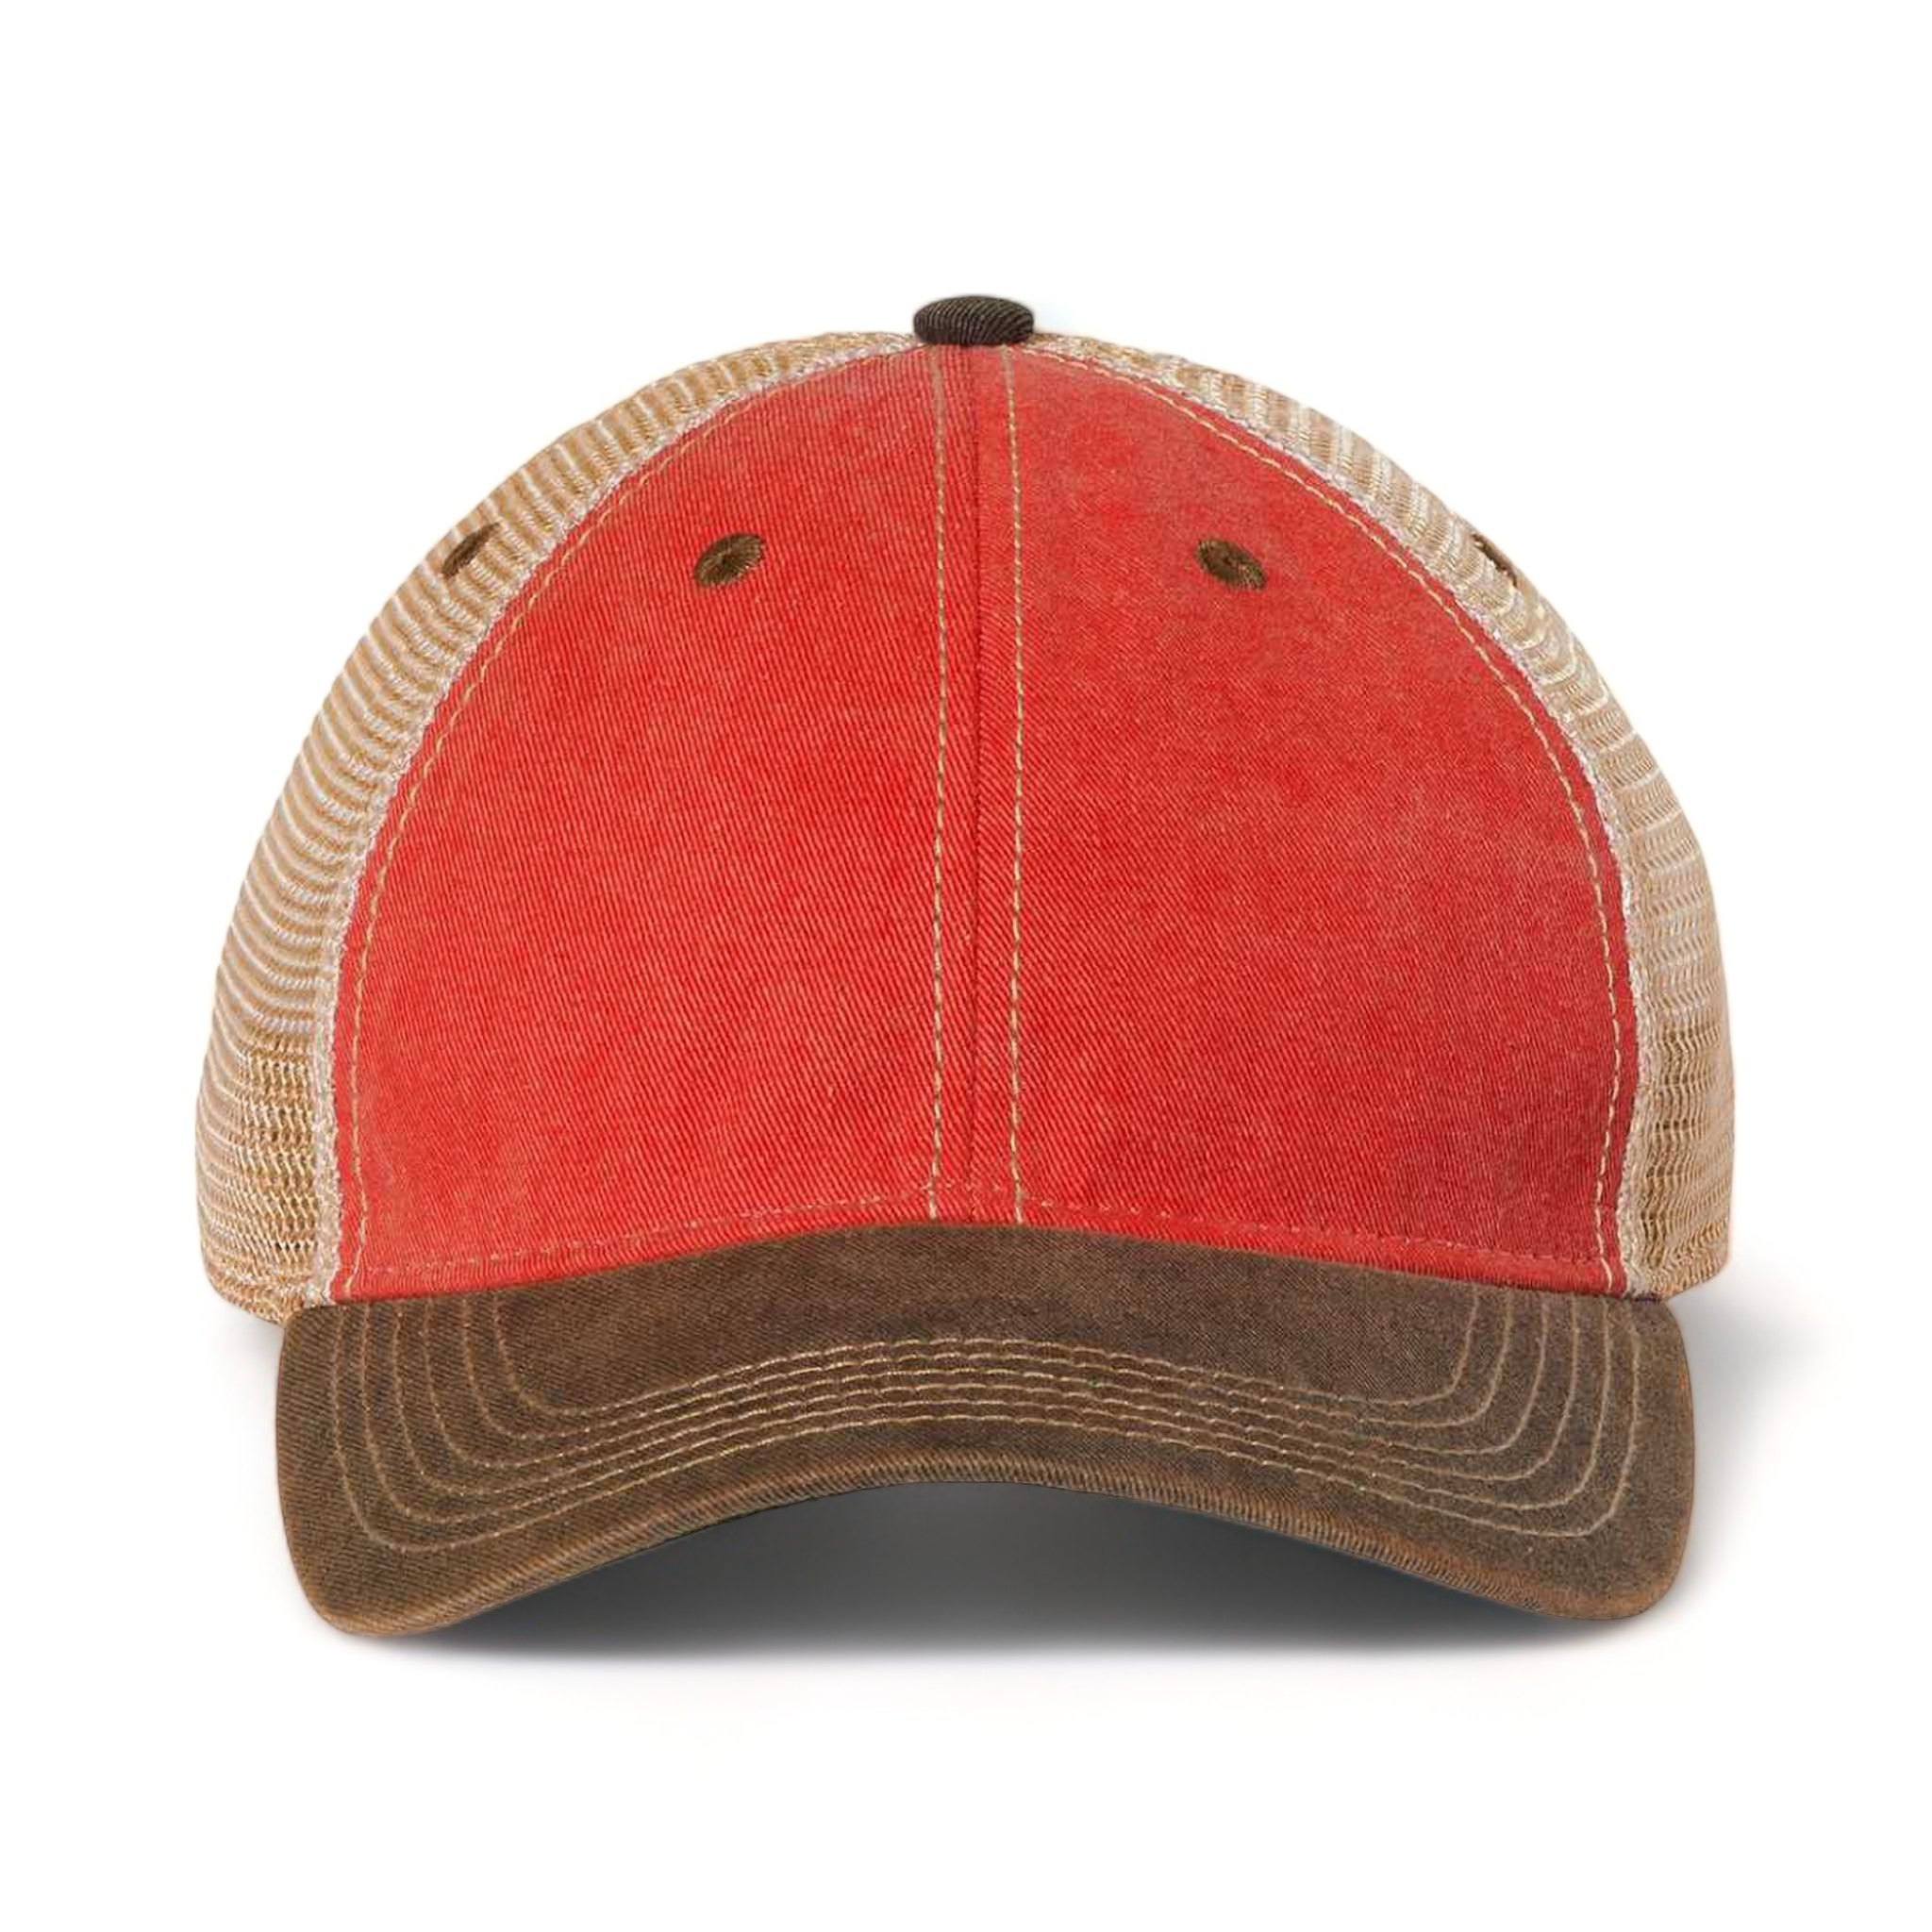 Front view of LEGACY OFA custom hat in scarlet red, black and khaki